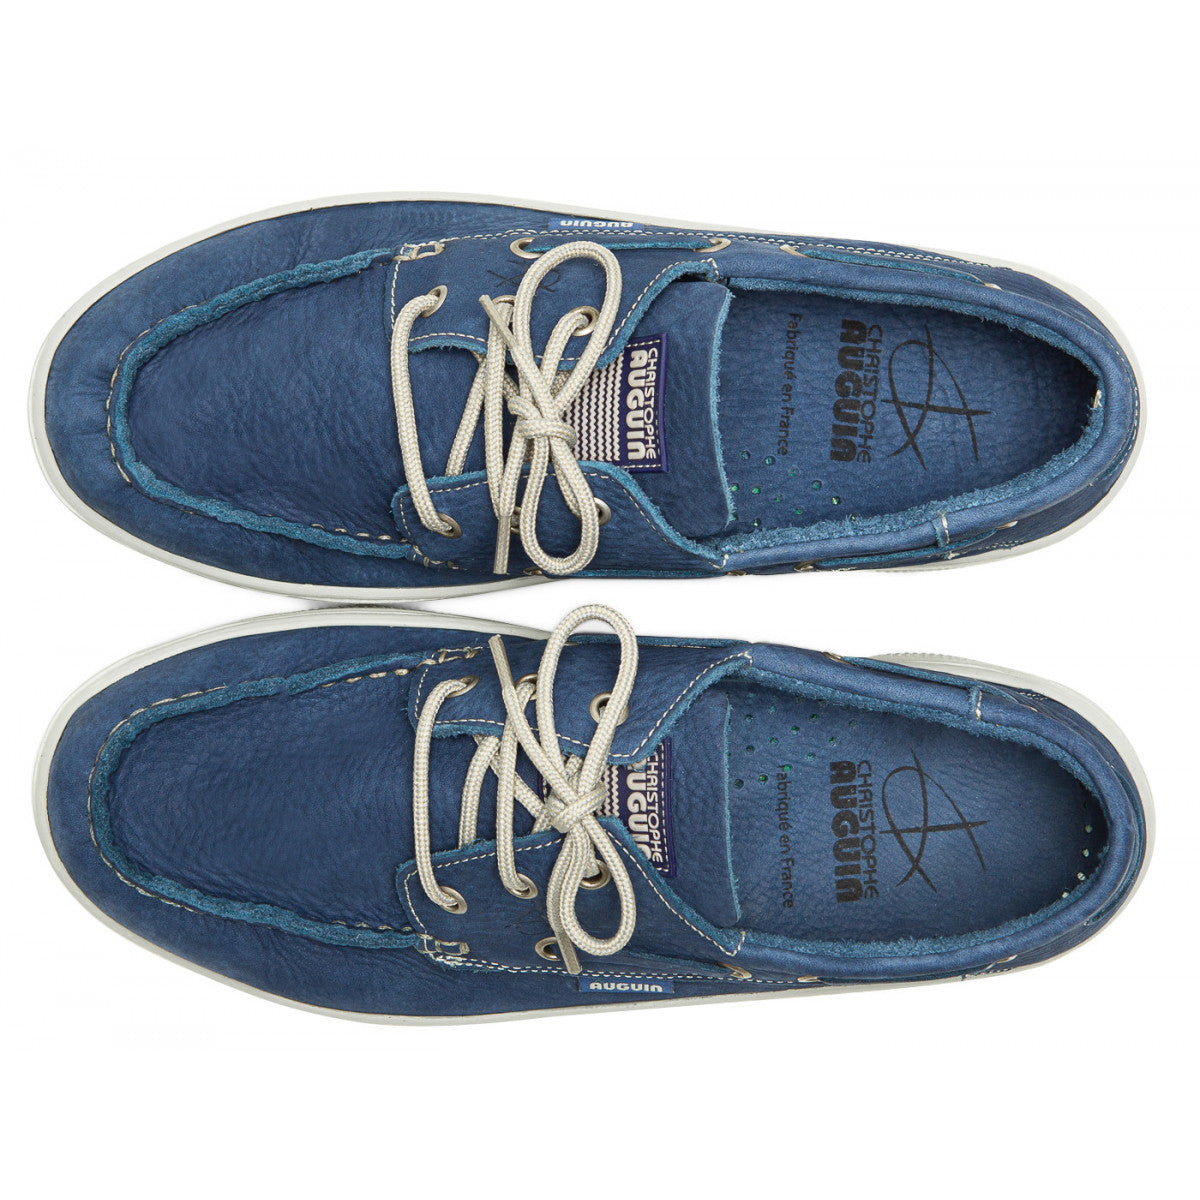 Christophe Auguin French Boat Shoe in Saphire Royal